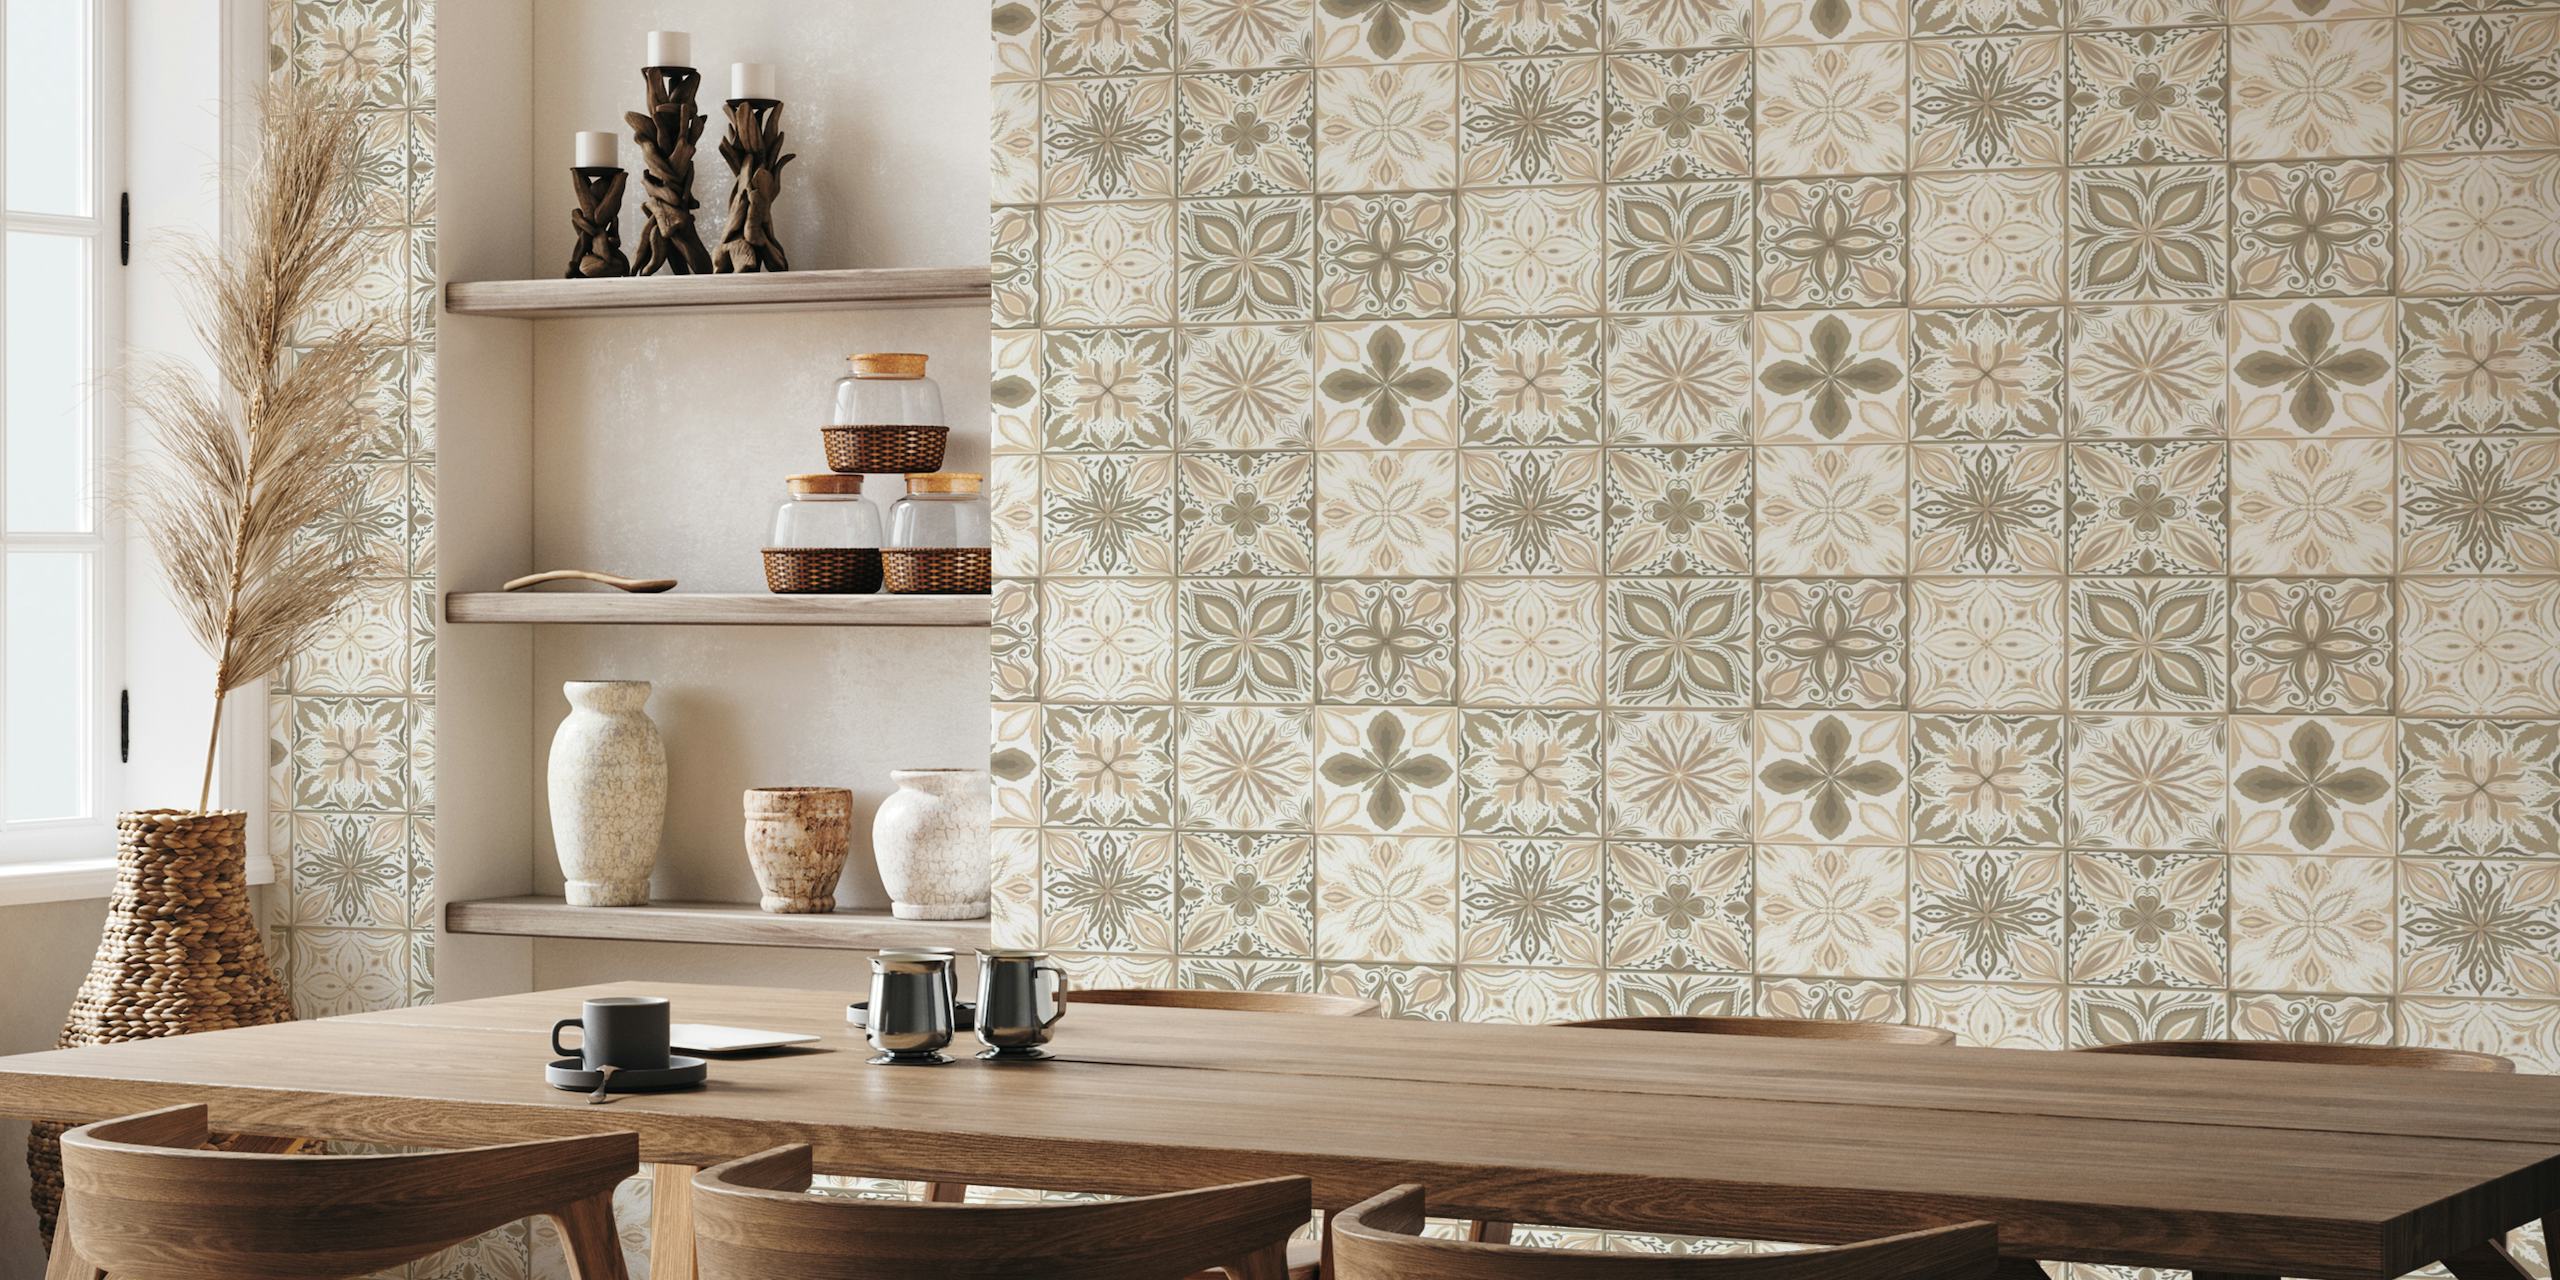 Ornate tiles in neutral browns wall mural